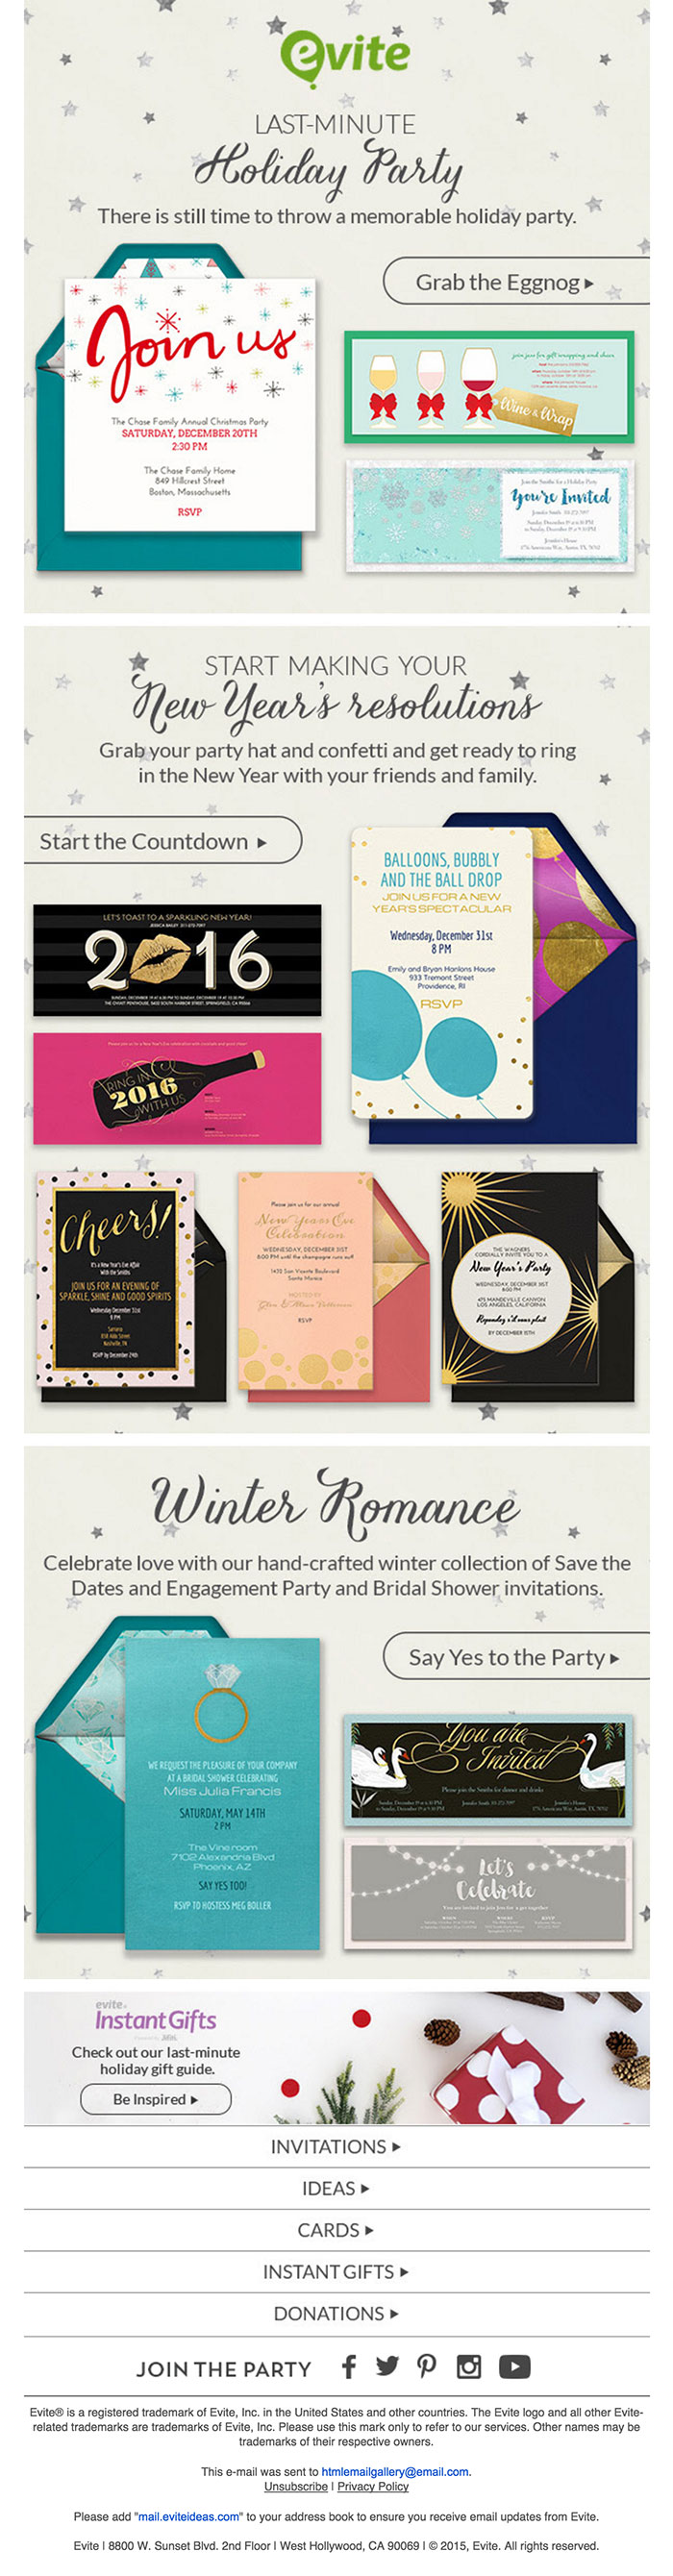 New Years html email design inspiration